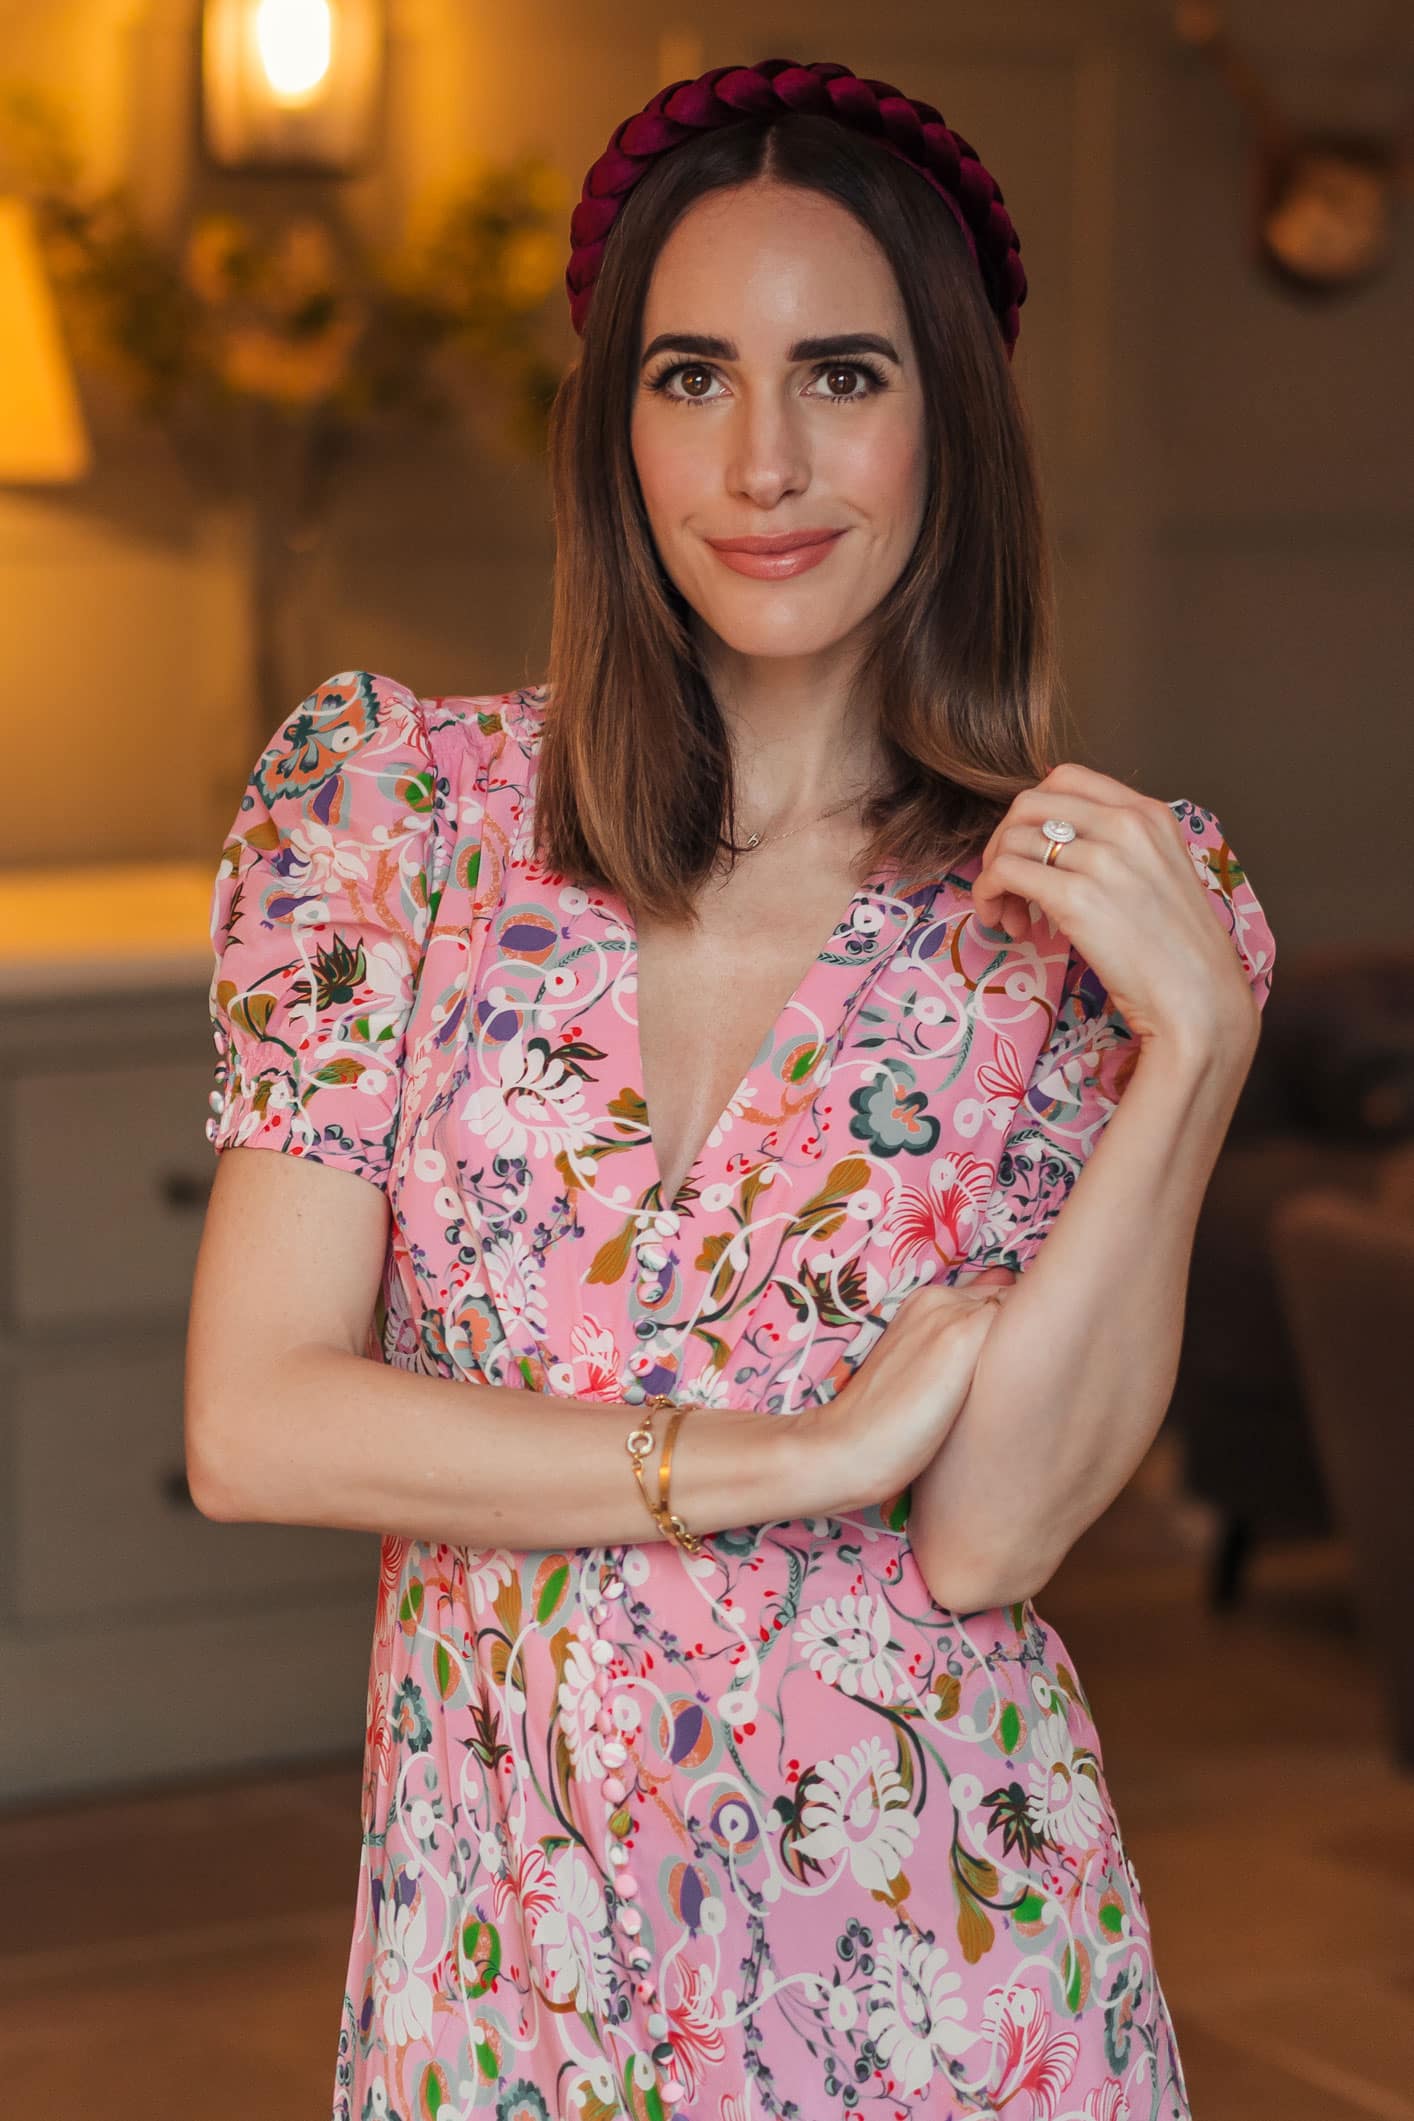 Louise Roe of Front Roe explains her easy winter beauty routine